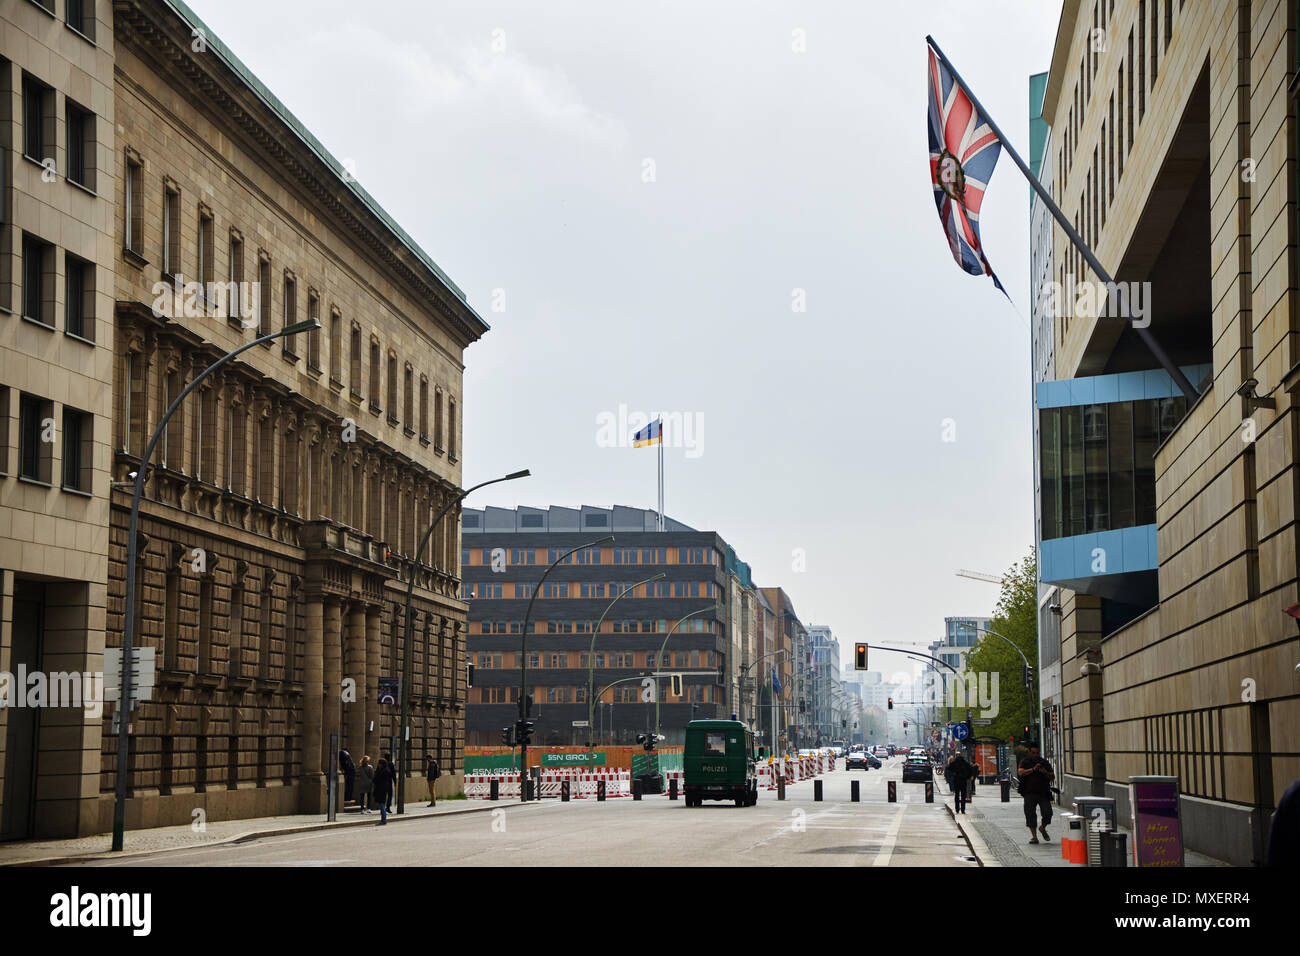 Berlin, Germany - April 14, 2018: Wilhelmstrasse with wall and flag on British Embassy building on the right and police car in the distance in Berlin Stock Photo